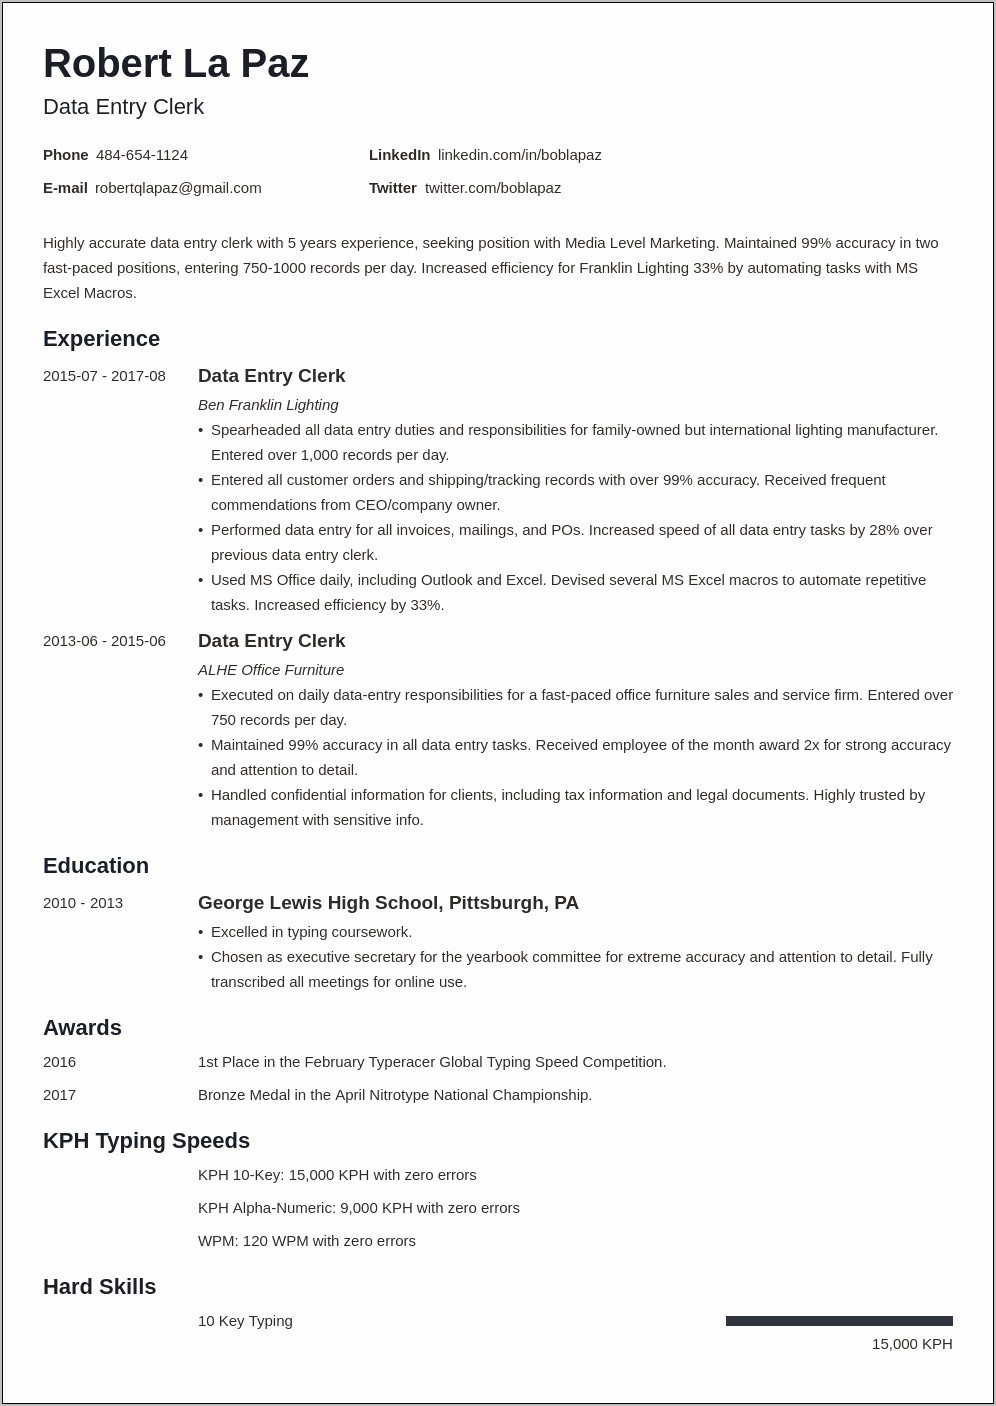 Resume Summary For Someone Looking To Do Transcription